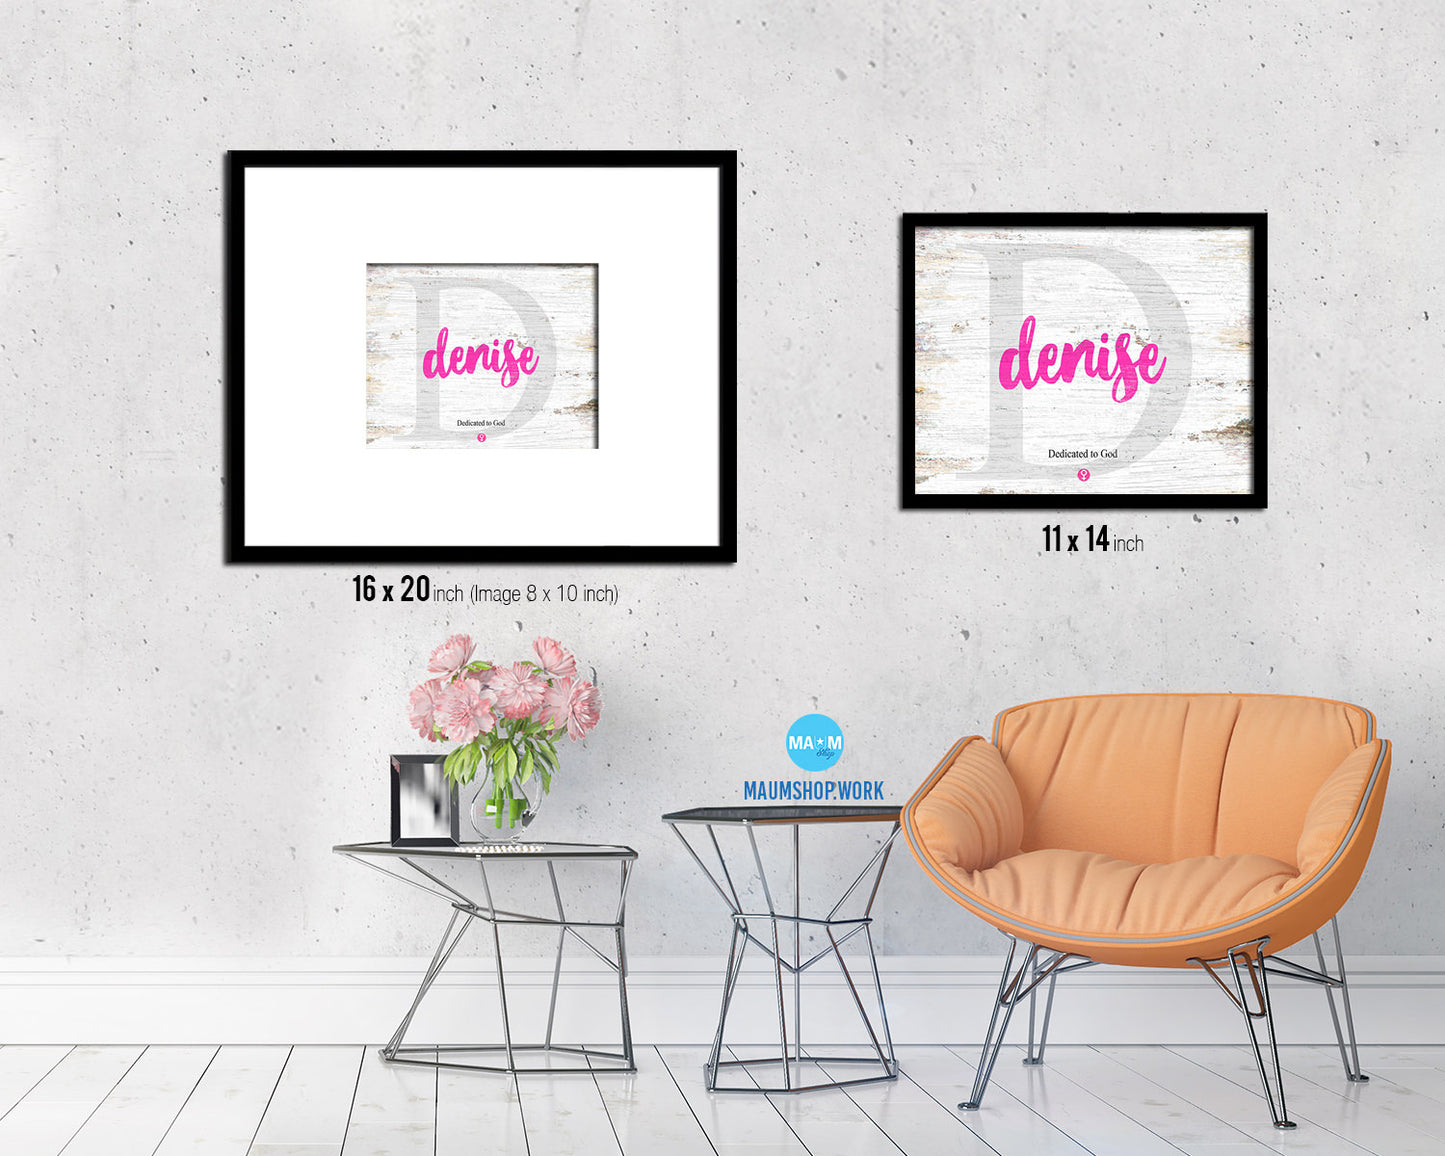 Denise Personalized Biblical Name Plate Art Framed Print Kids Baby Room Wall Decor Gifts